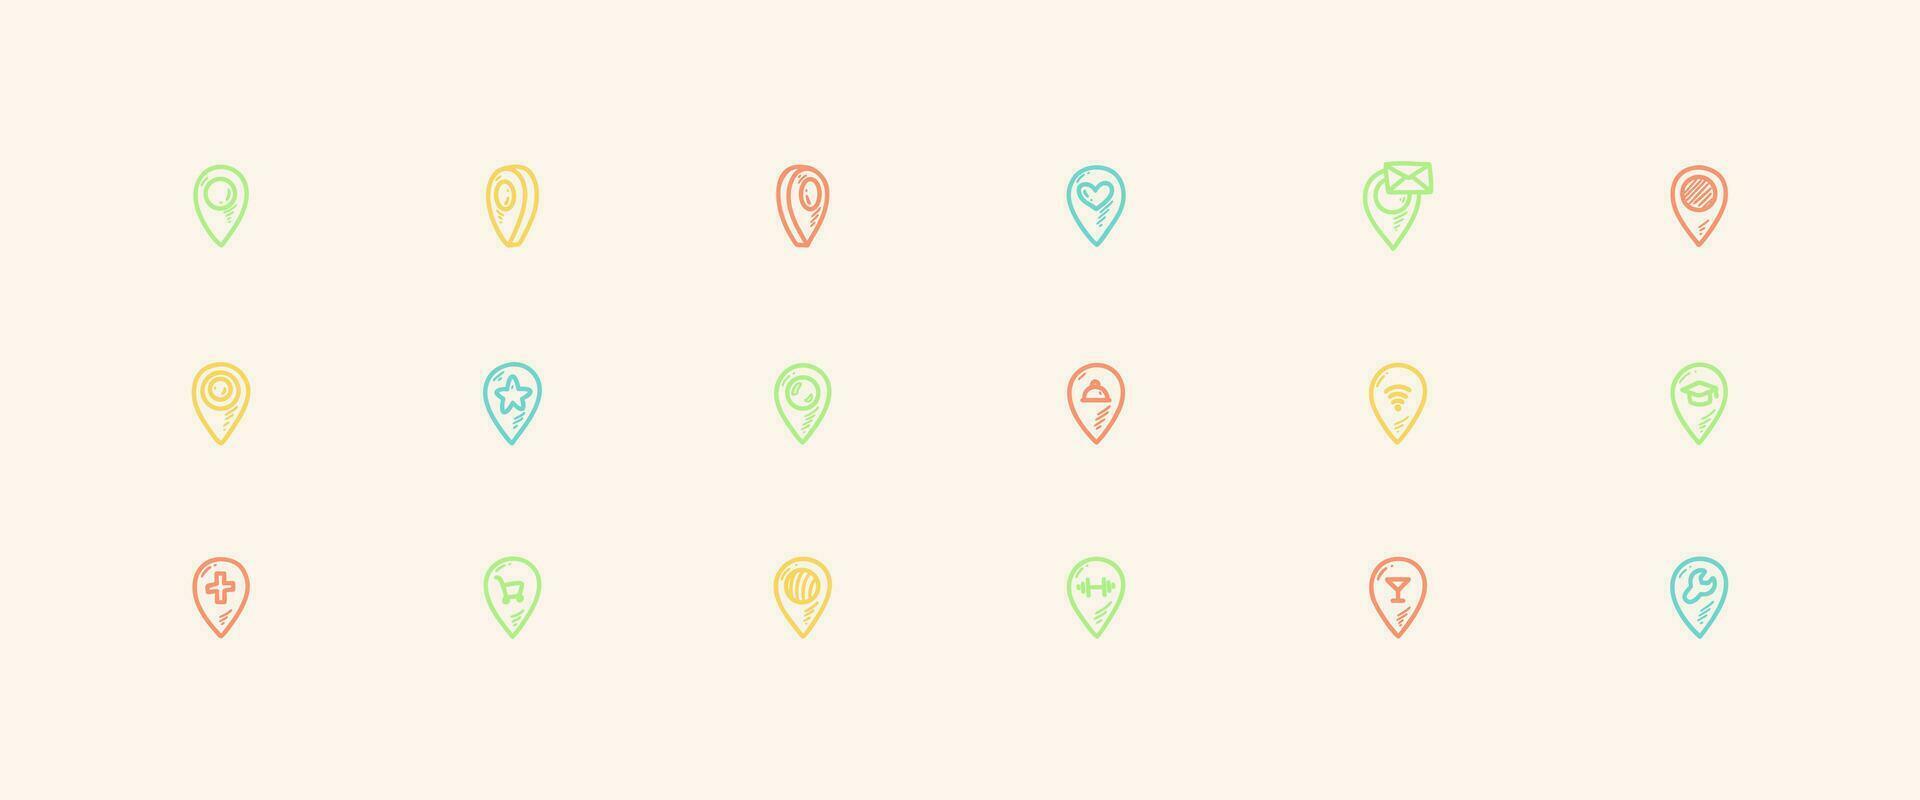 Cute line doodle map location pin icons set. Vector illustration in graffiti Japanese sketch style. Wifi, post office, restaurant, delivery, gym, university, doctor, store pinpoint